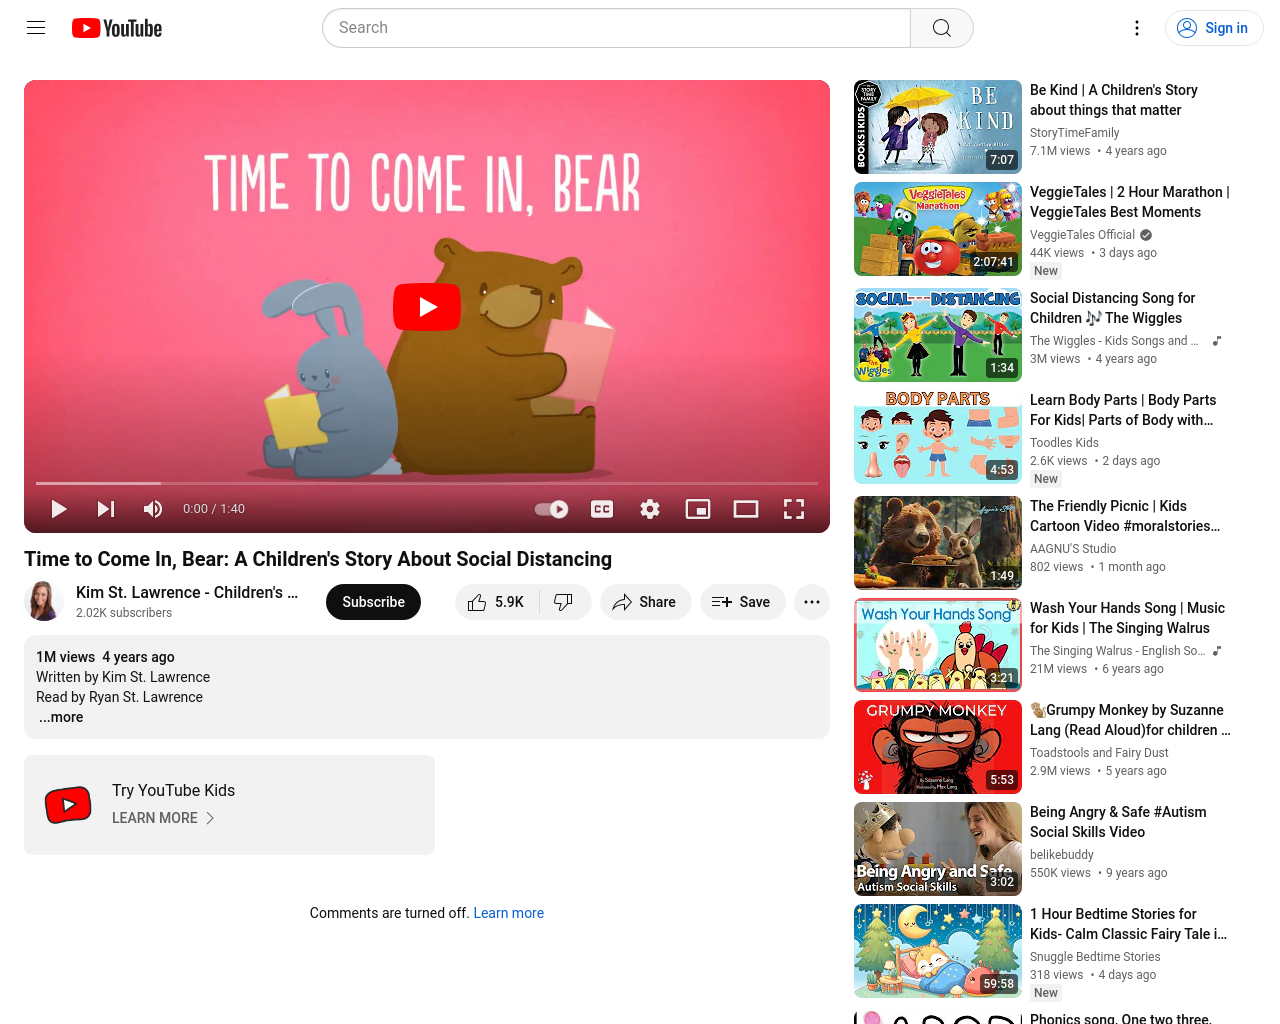 Time to Come In, Bear: A Children's Story about Social Distancing